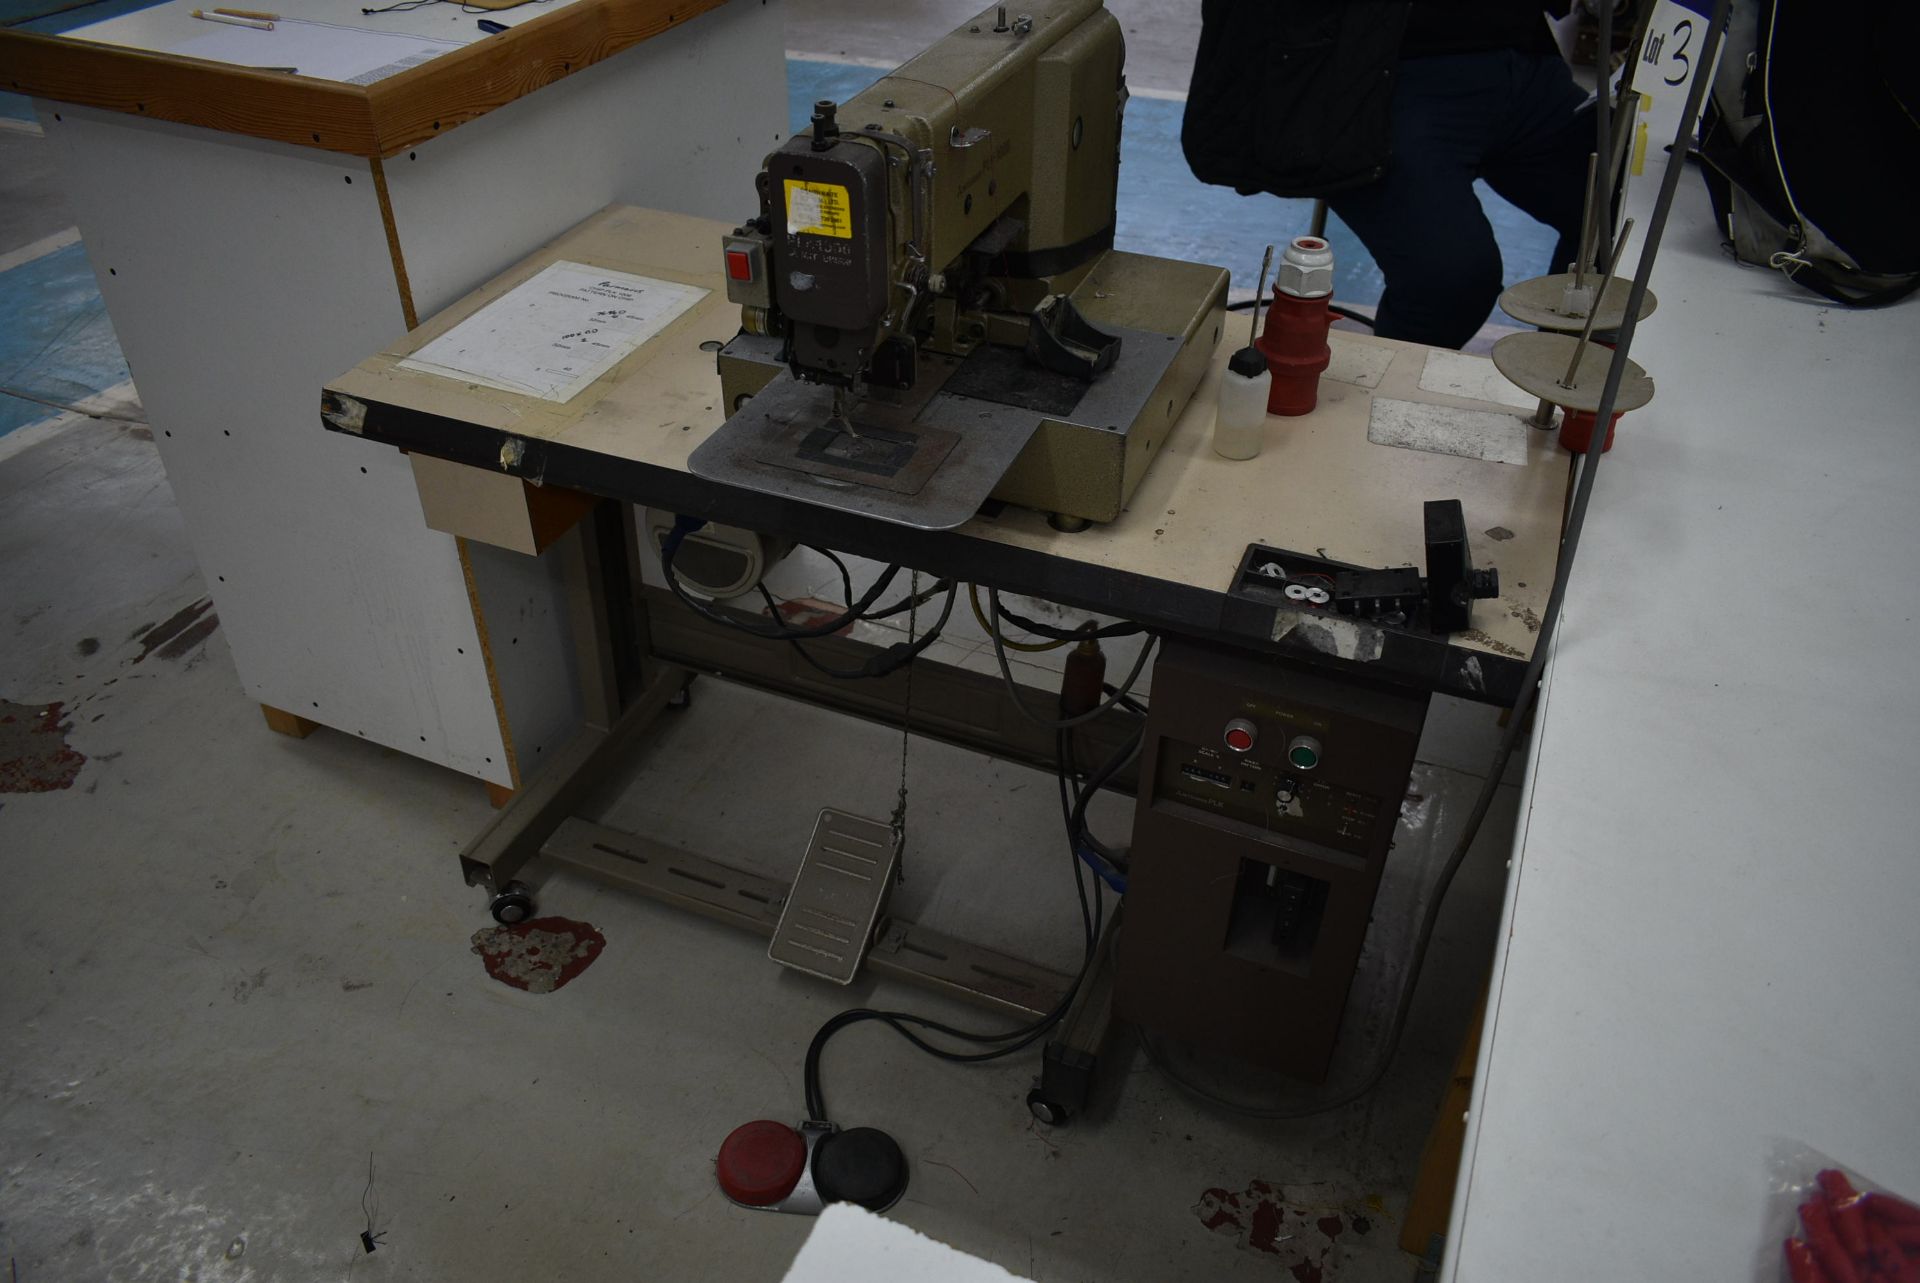 Mitsubishi PLK-10060 PROGRAMMABLE SEWING MACHINE, serial no. 150450, with bench and Limi-Stop Z - Image 2 of 7